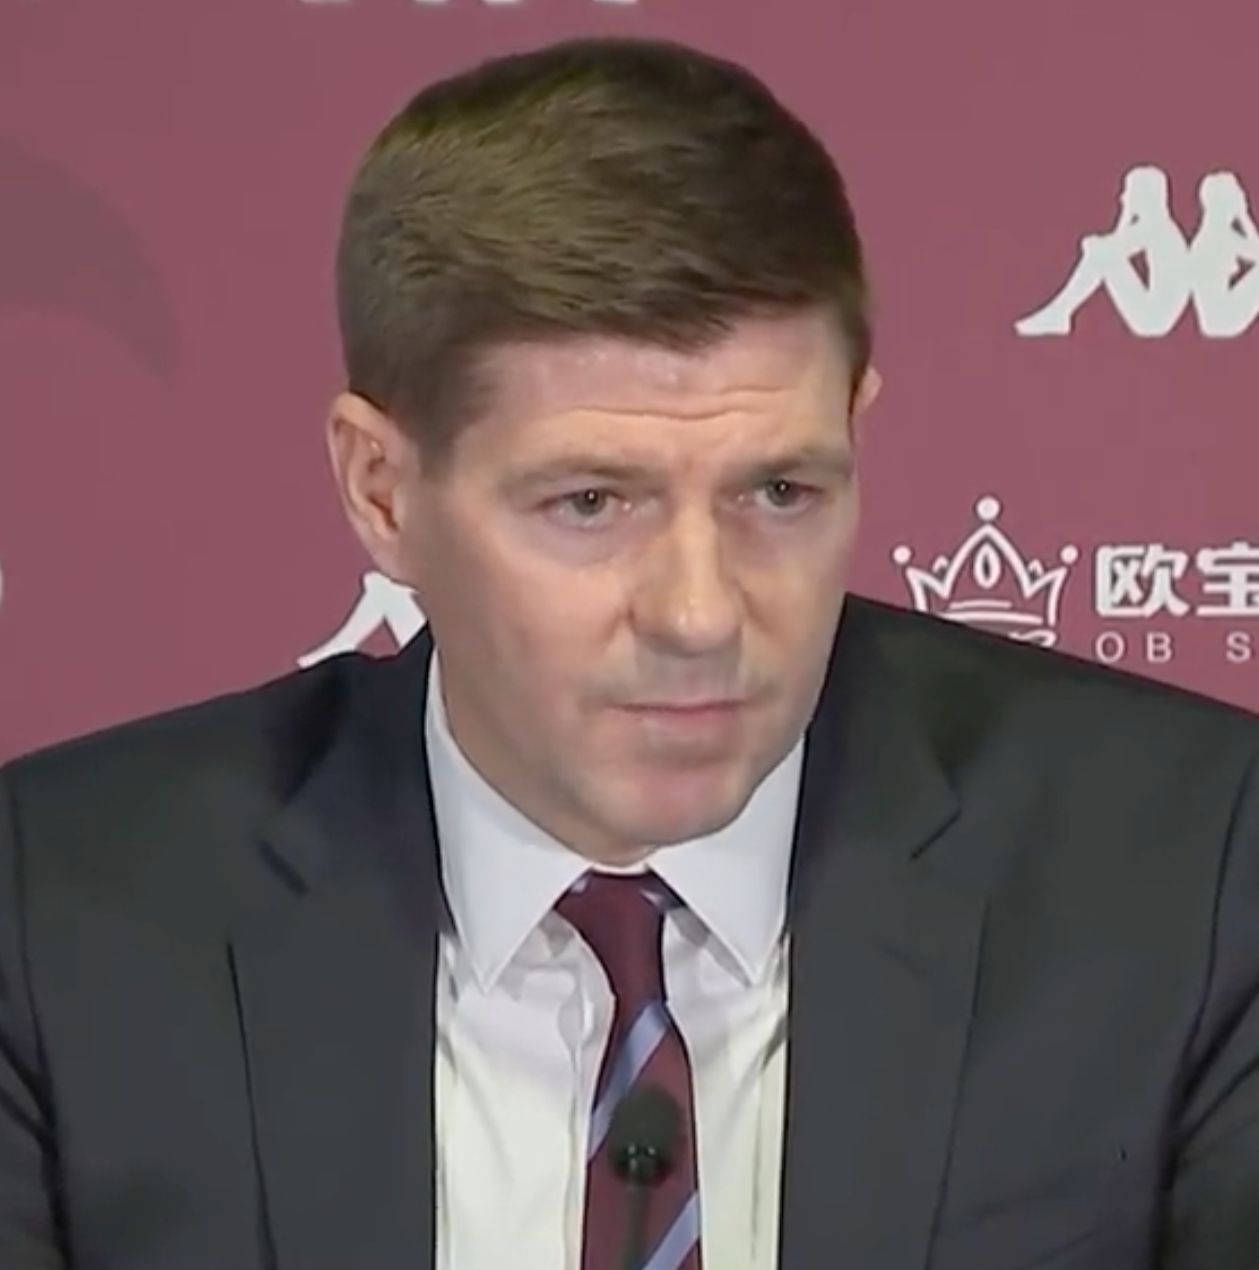 (Video) ‘Everyone knows around the world what Liverpool means to me’ – Gerrard weighs in on Anfield links during first Villa press conference